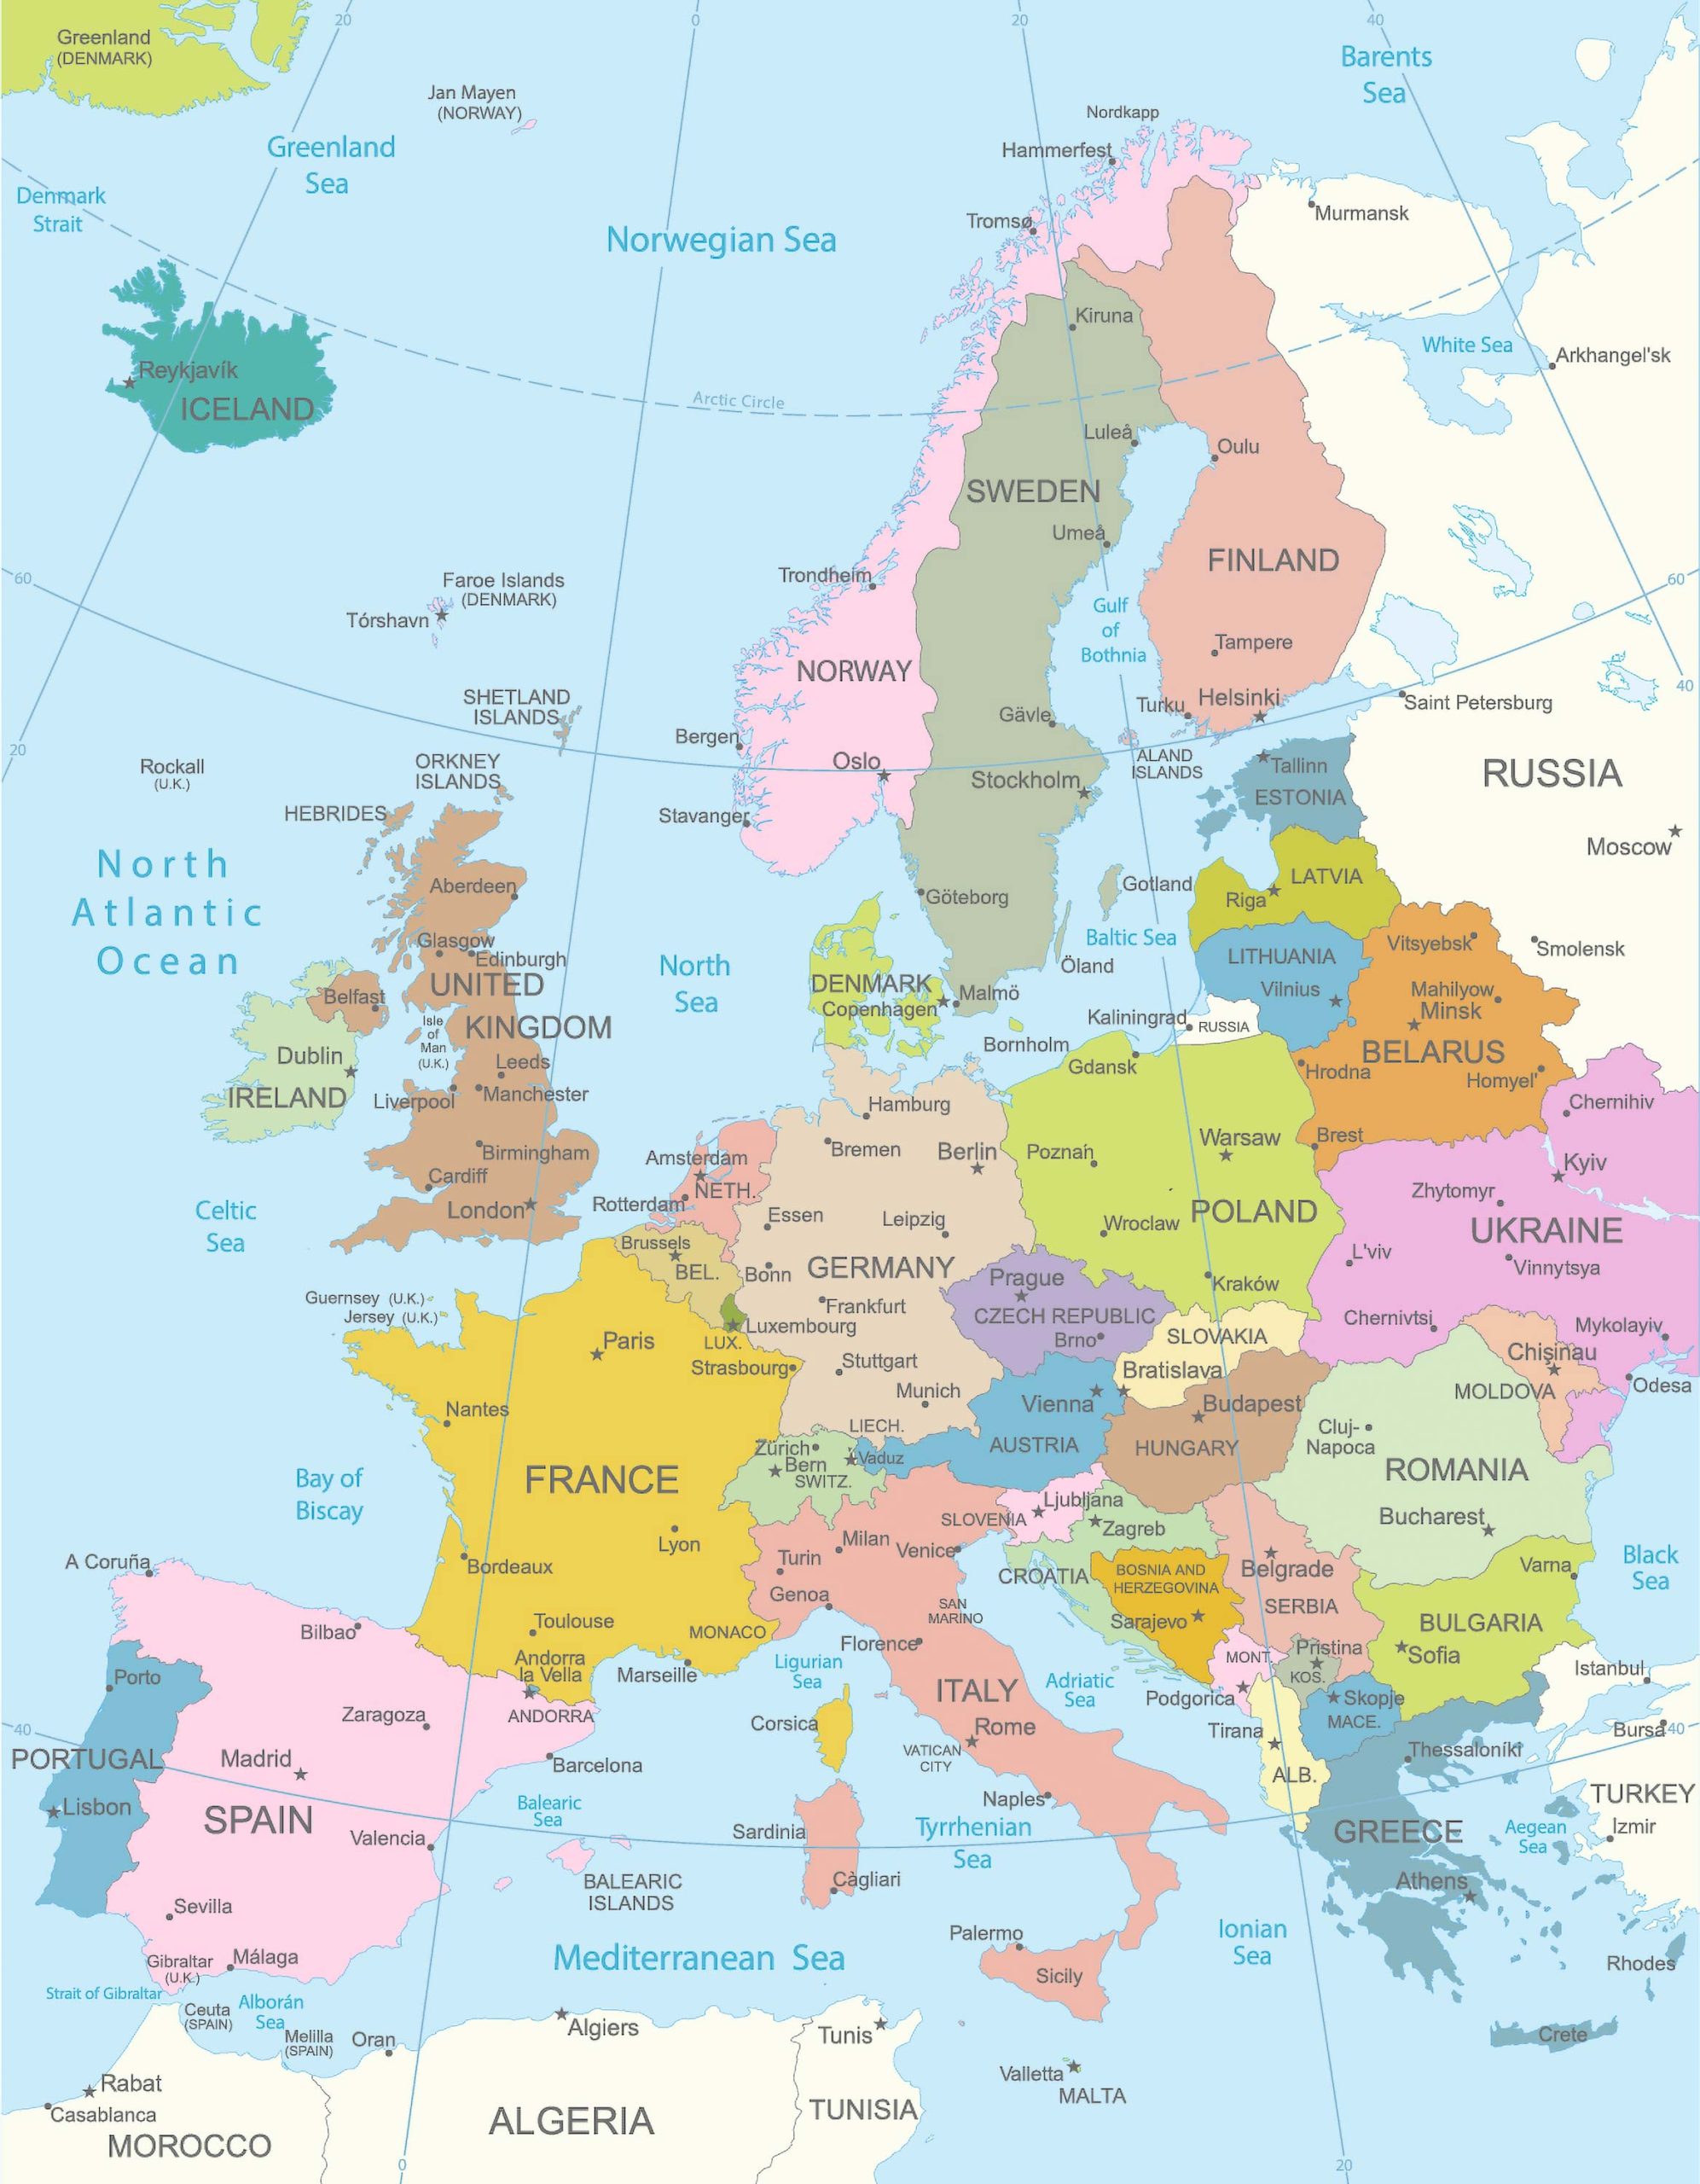 Countries, Capitals and Major Cities of the Europe Map